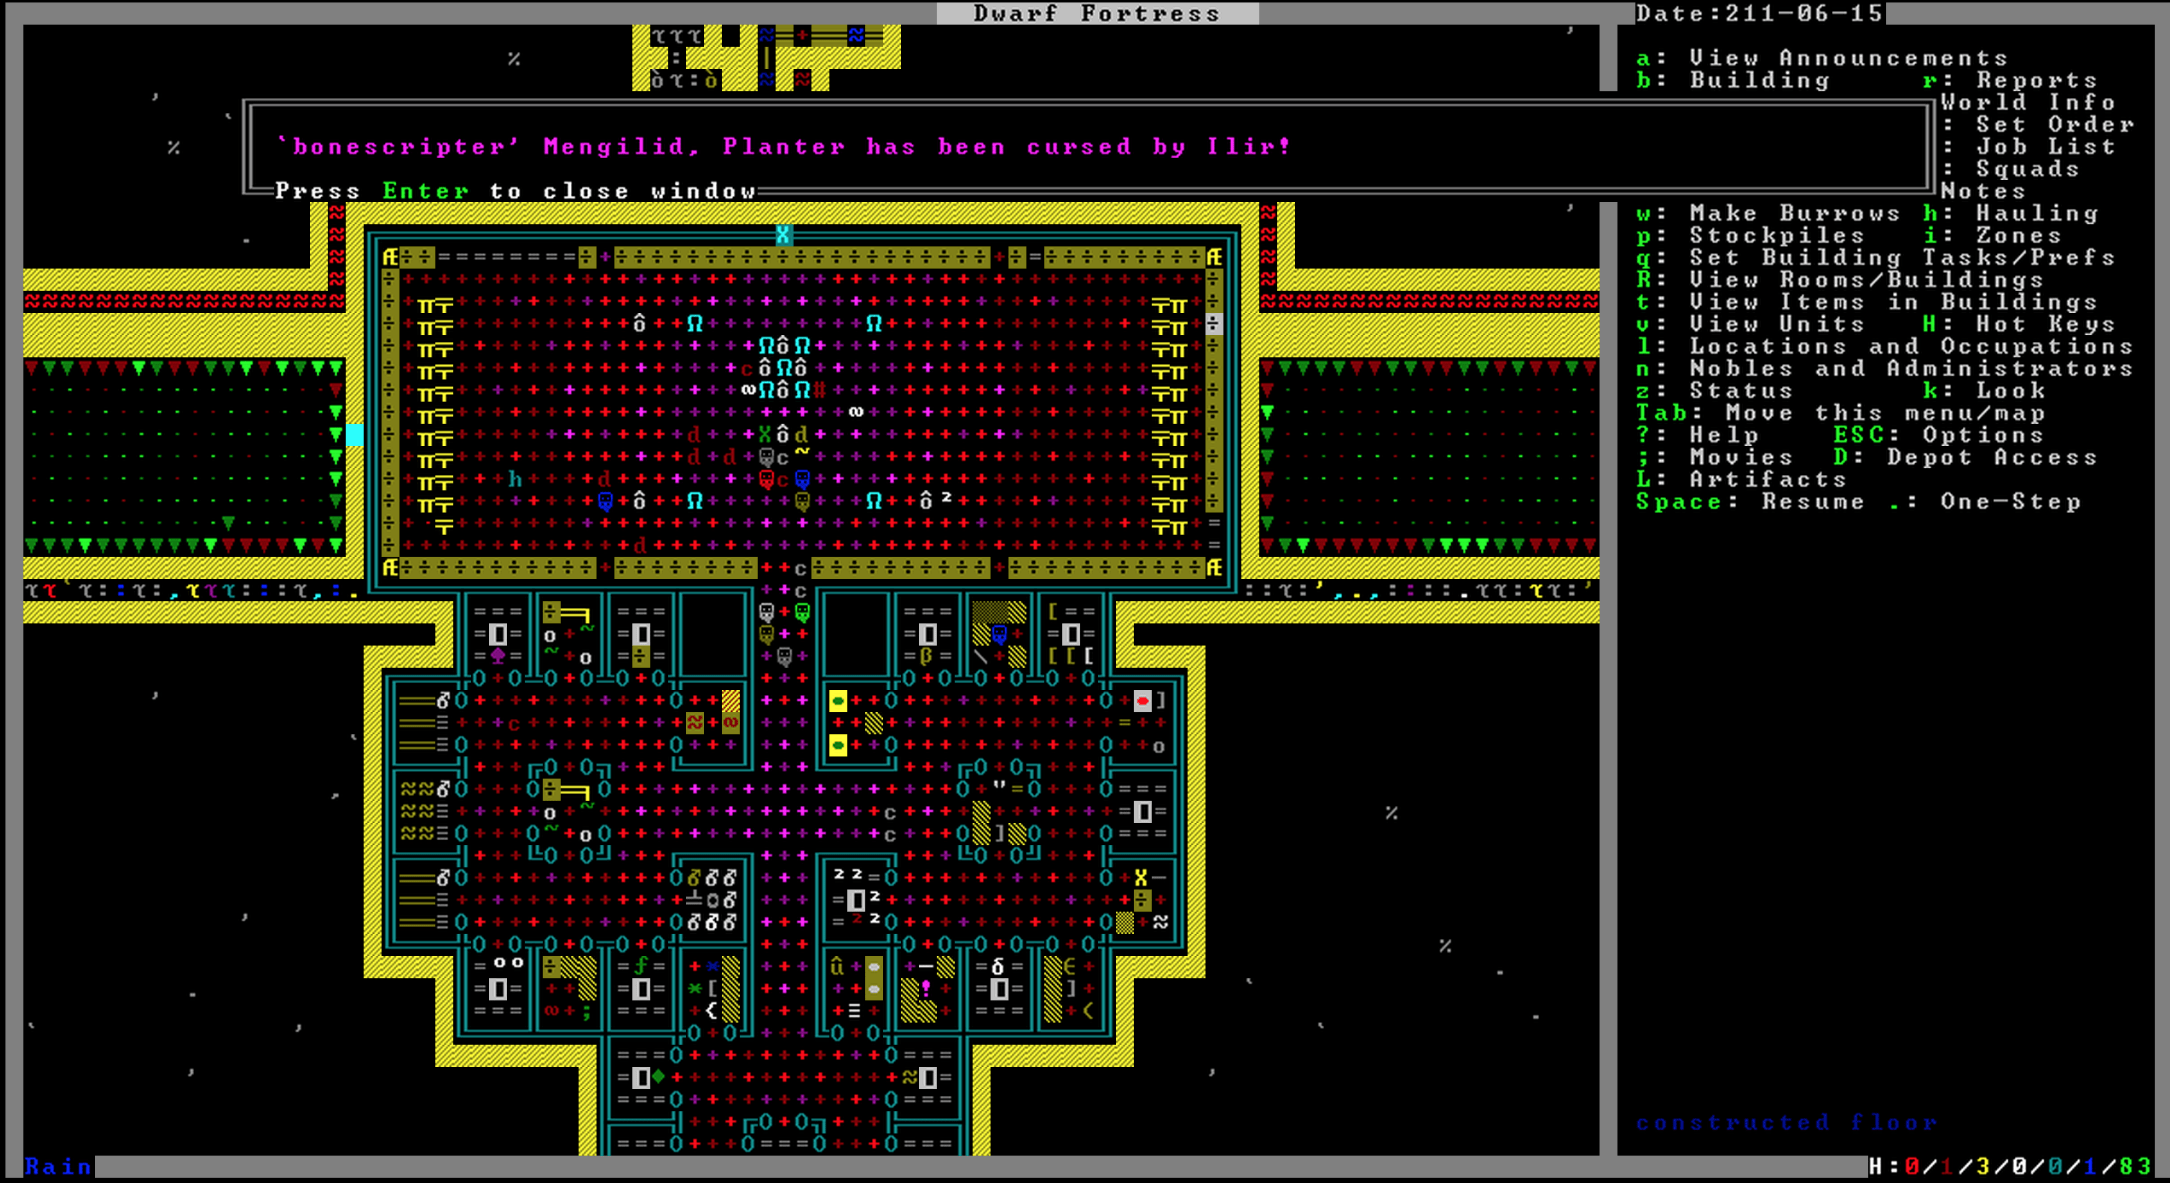 Great News For Fans Of Cult Classic Dwarf Fortress: The Game’s Latest Premium Release Includes New Graphics